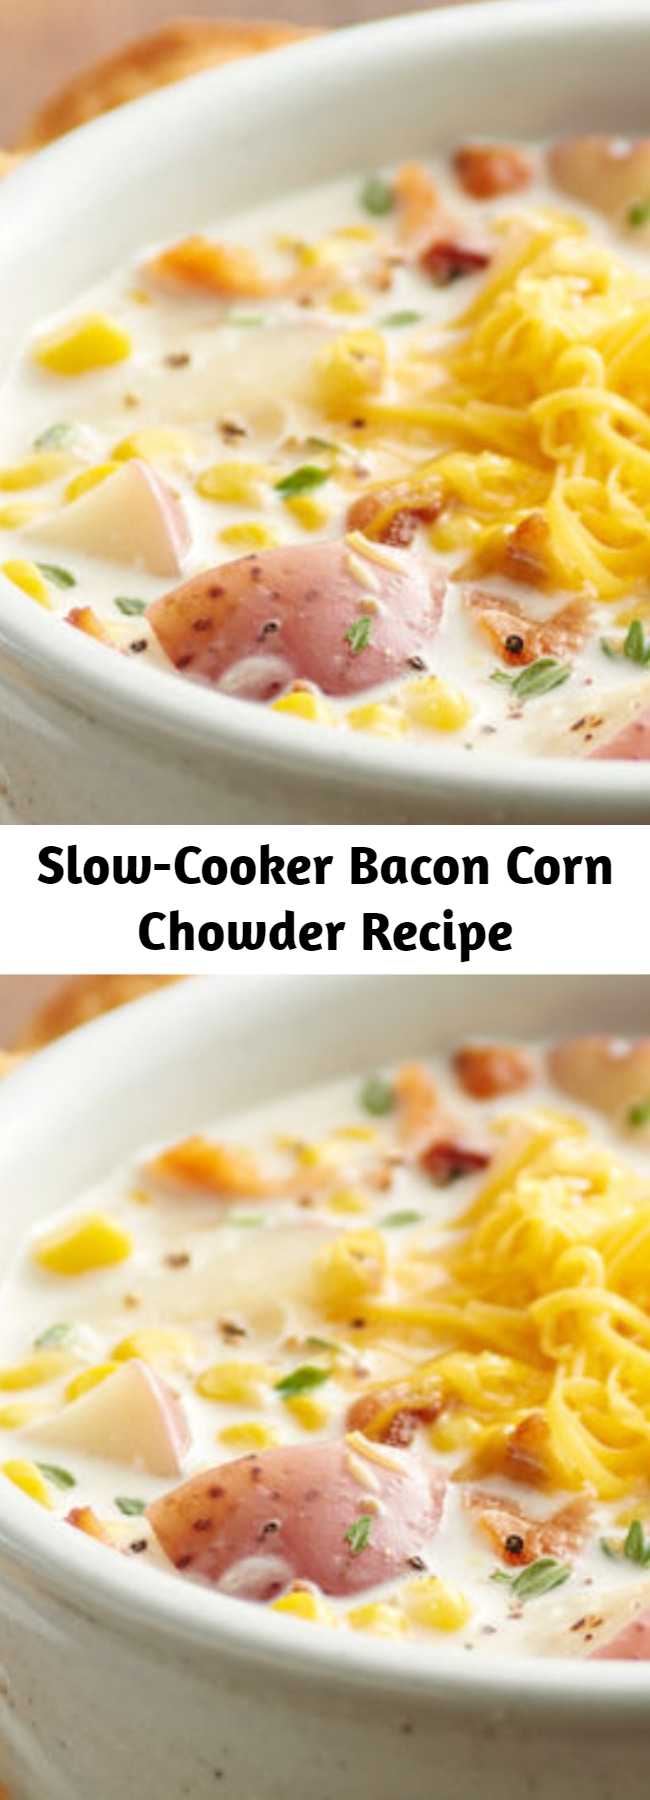 Slow-Cooker Bacon Corn Chowder Recipe - Hearty and creamy, this classic corn and potato soup gets extra oomph from our favorite ingredient—bacon. It only takes a few minutes to pull together, and then the slow cooker will do all the work.